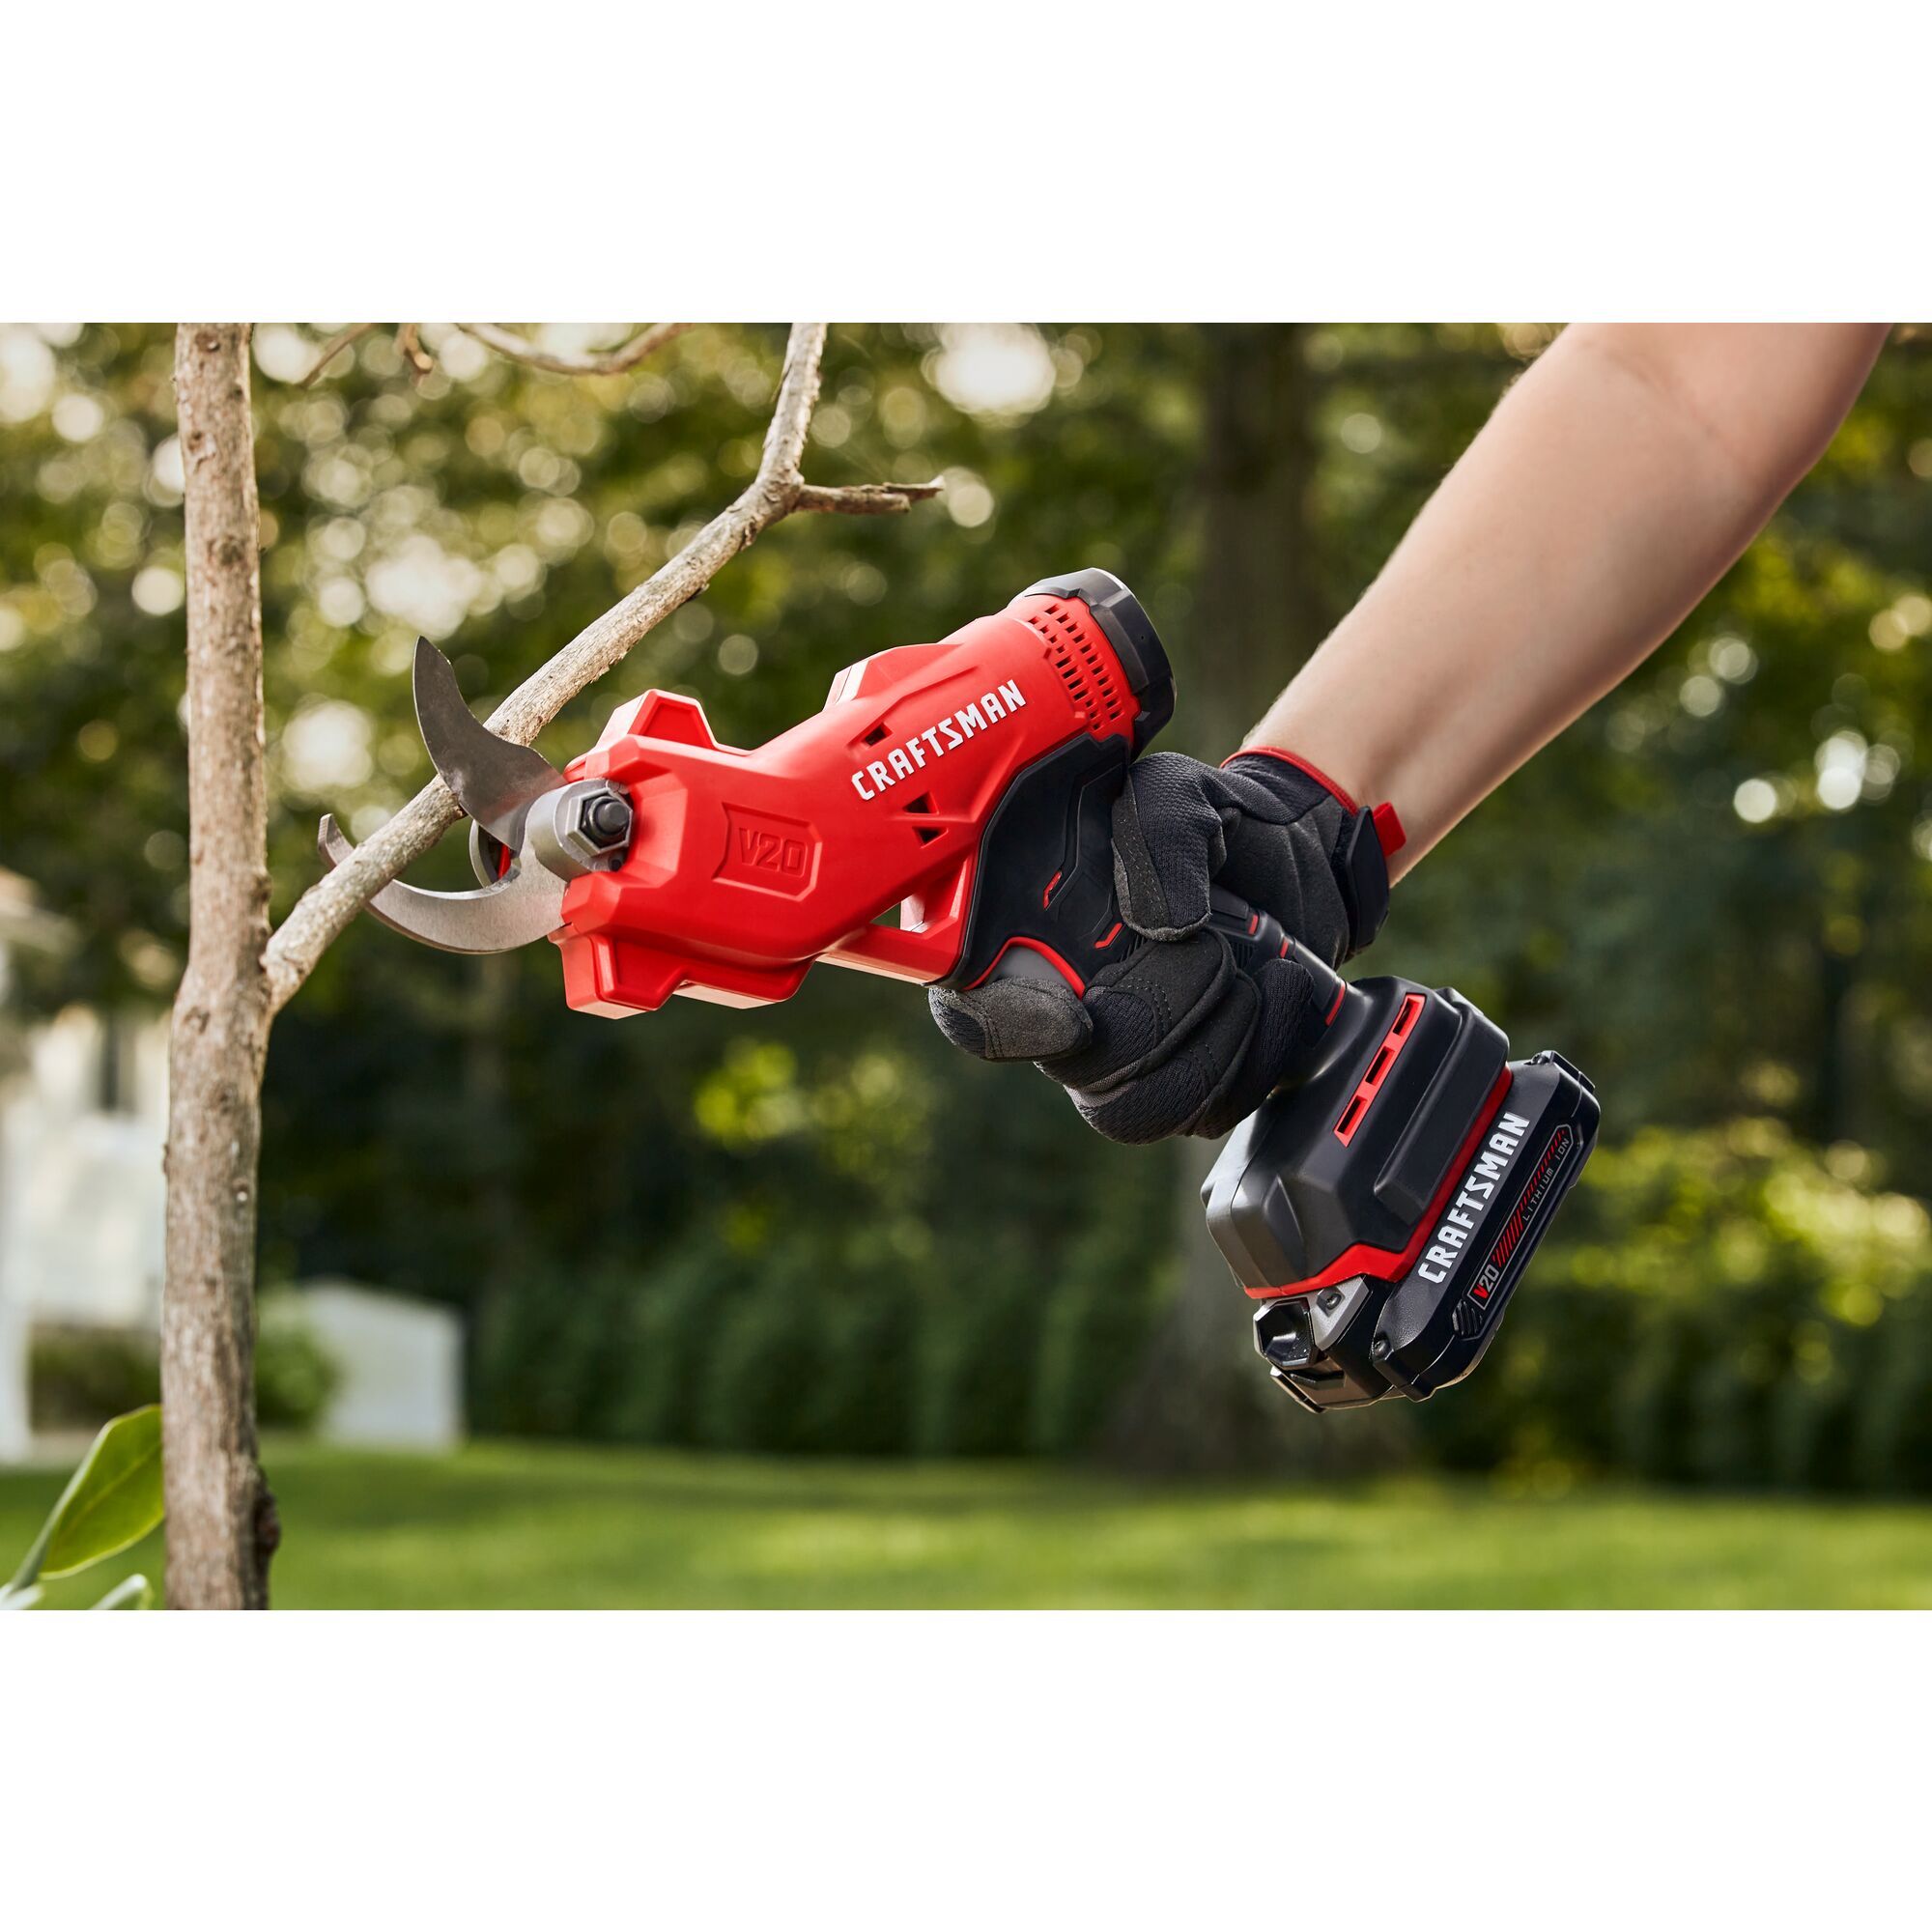 20 volt cordless pruner kit being used by a person to cut a branch in the garden.